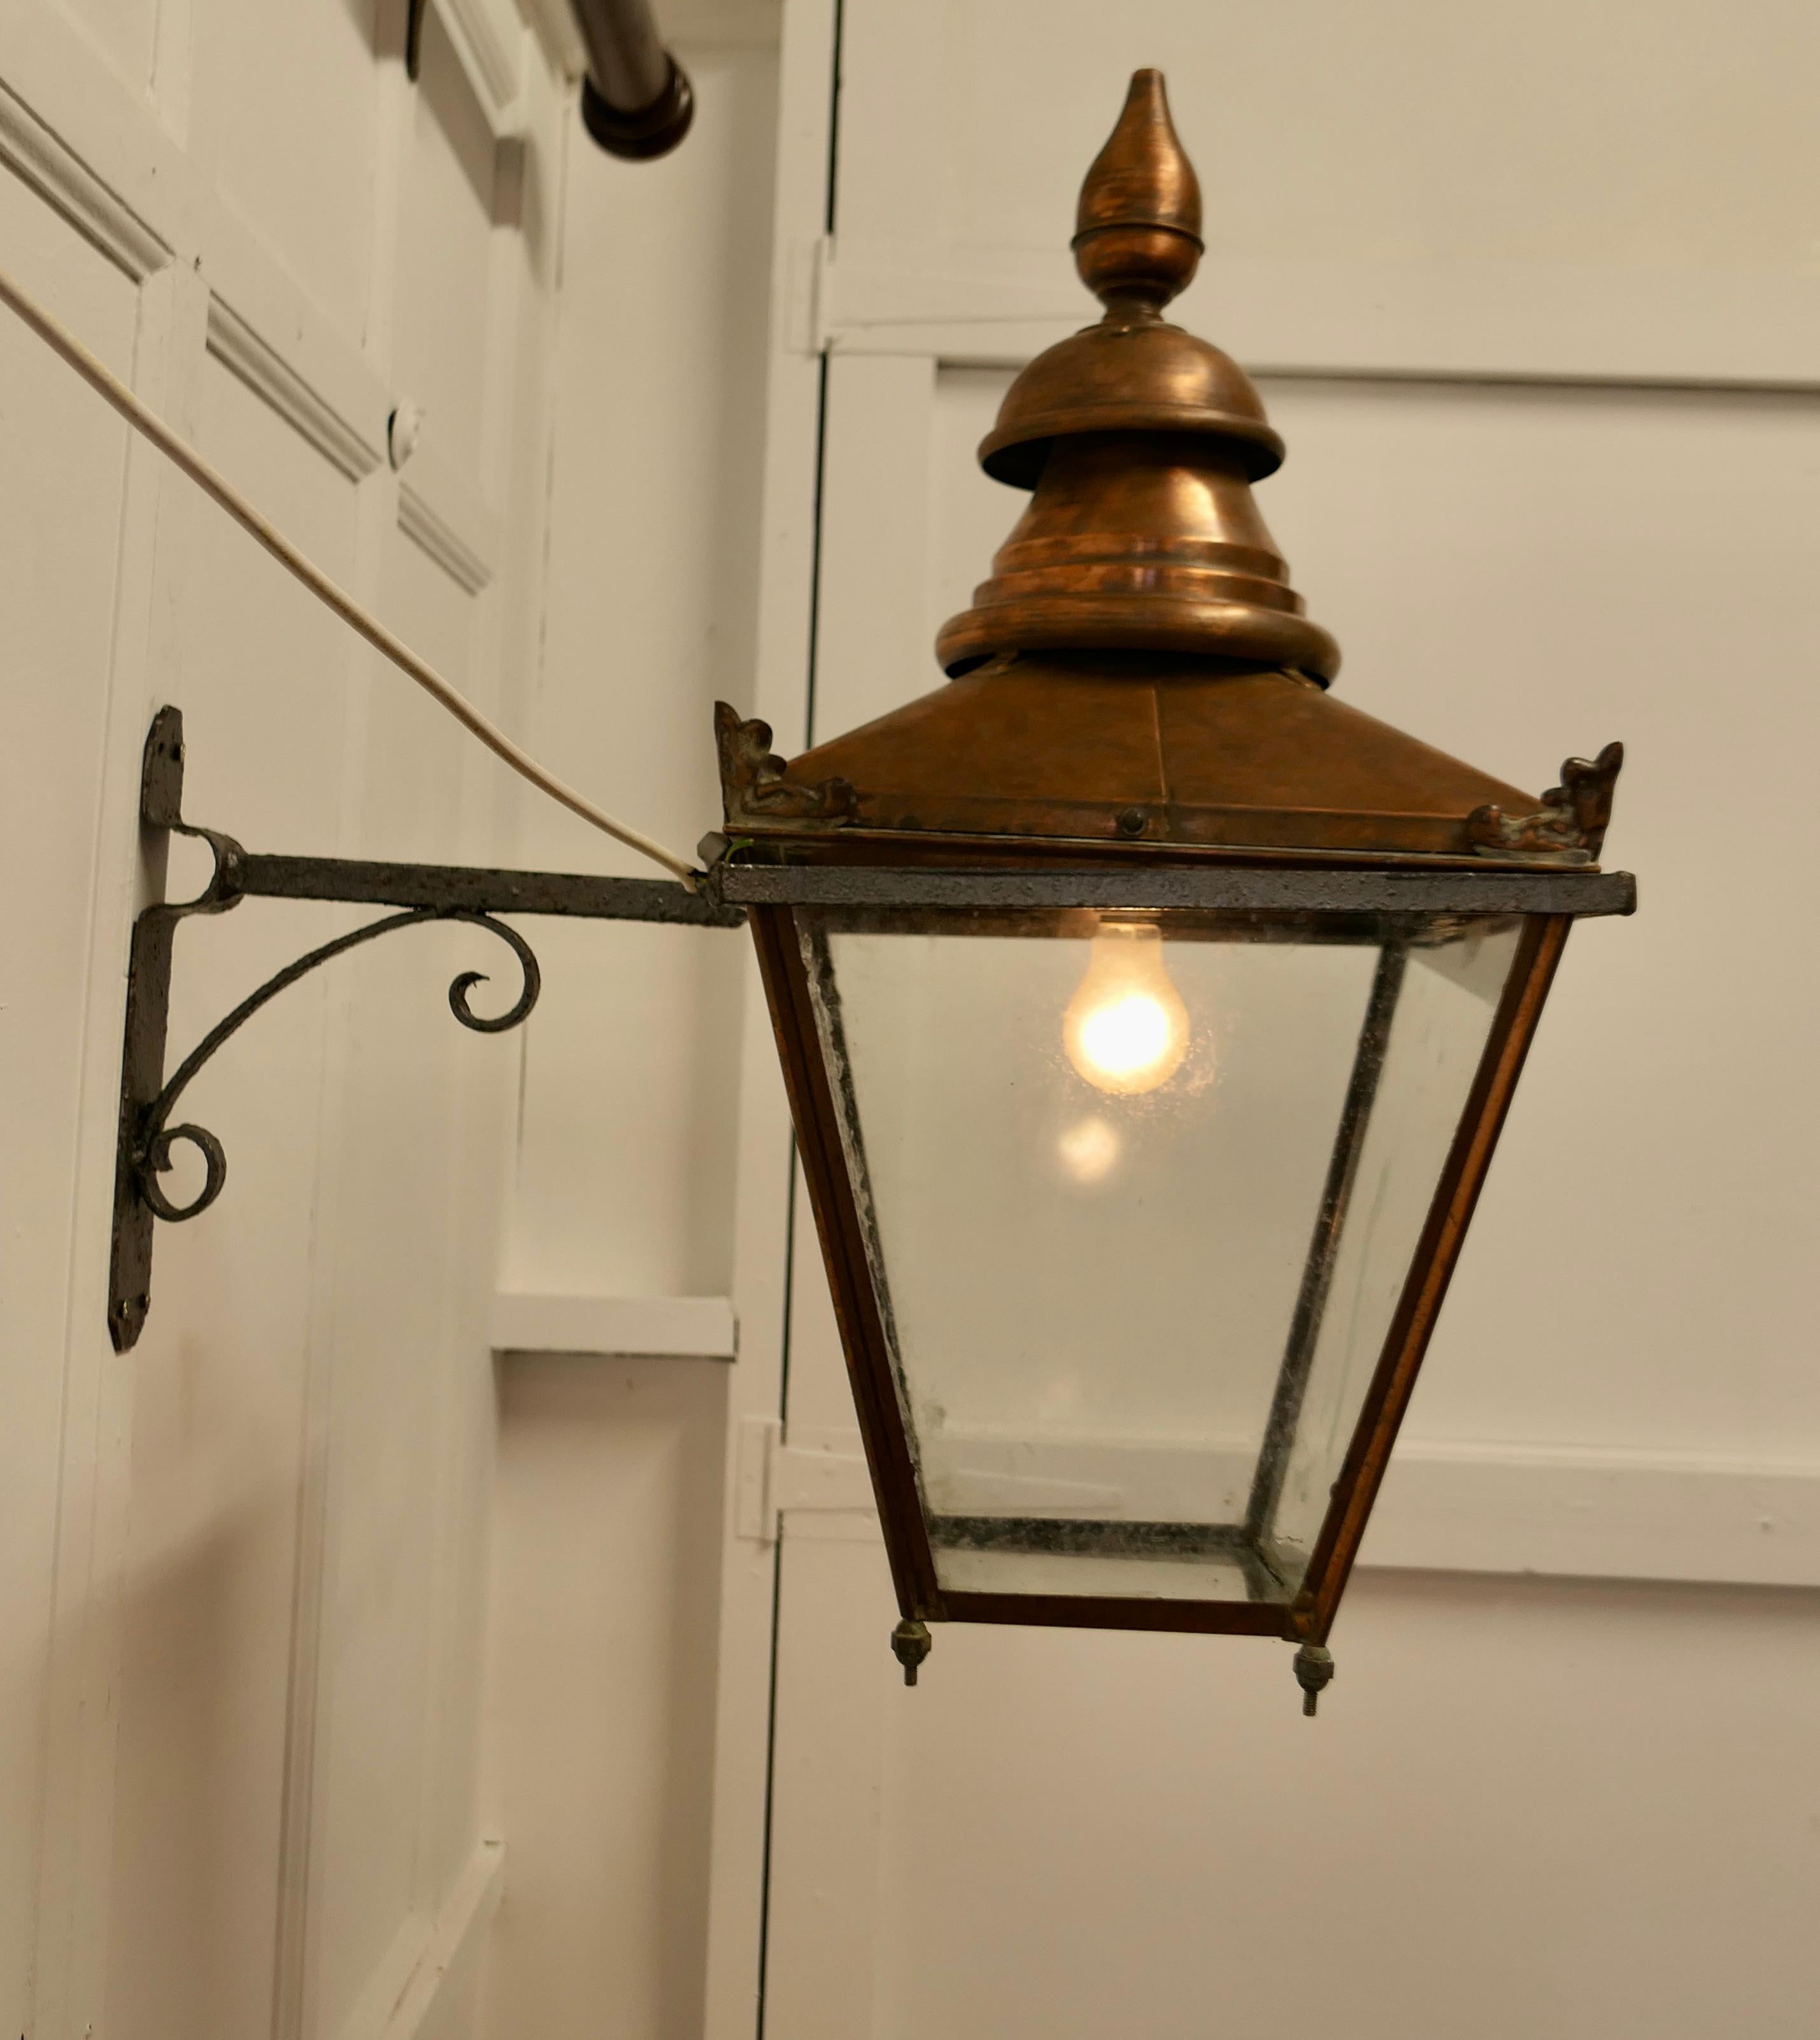 Early 20th Century Large Copper Wall Hanging Lantern    This is a Large Copper street light style 